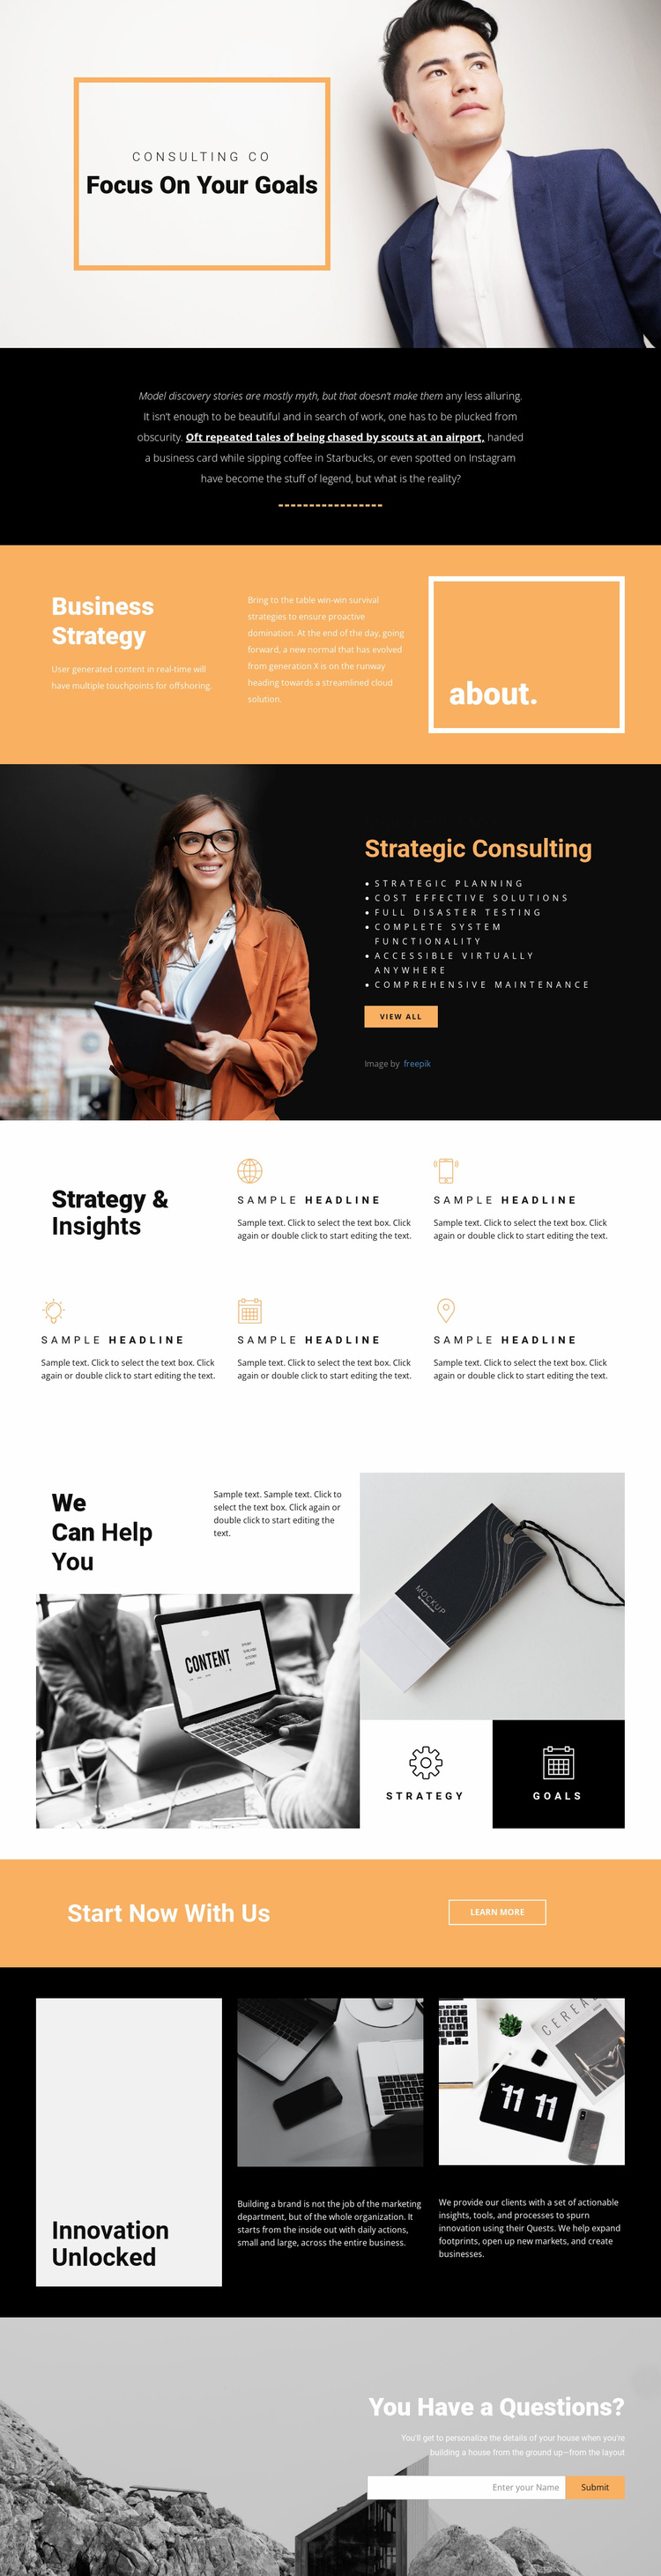 Goals for modern business  Landing Page